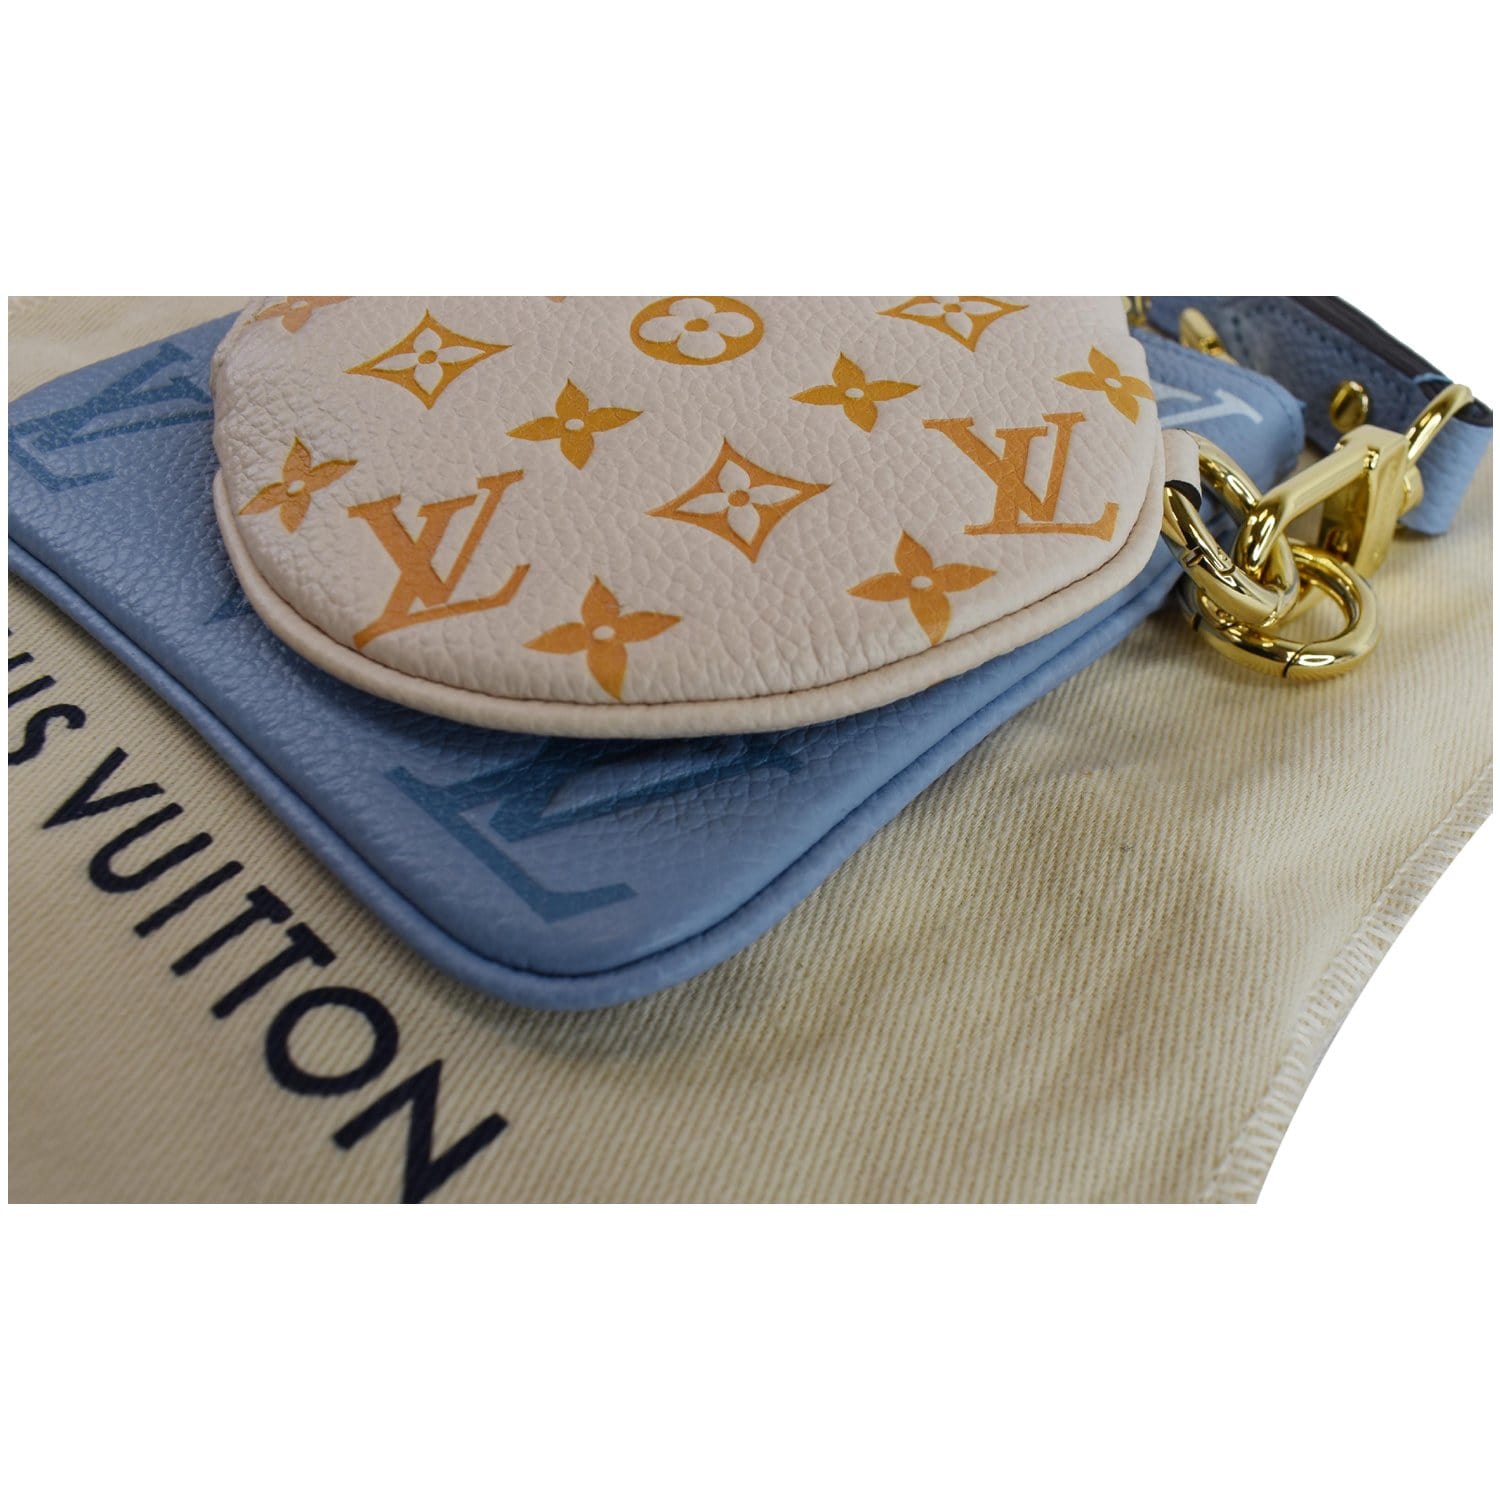 LOUIS VUITTON BLUE AND YELLOW Purse